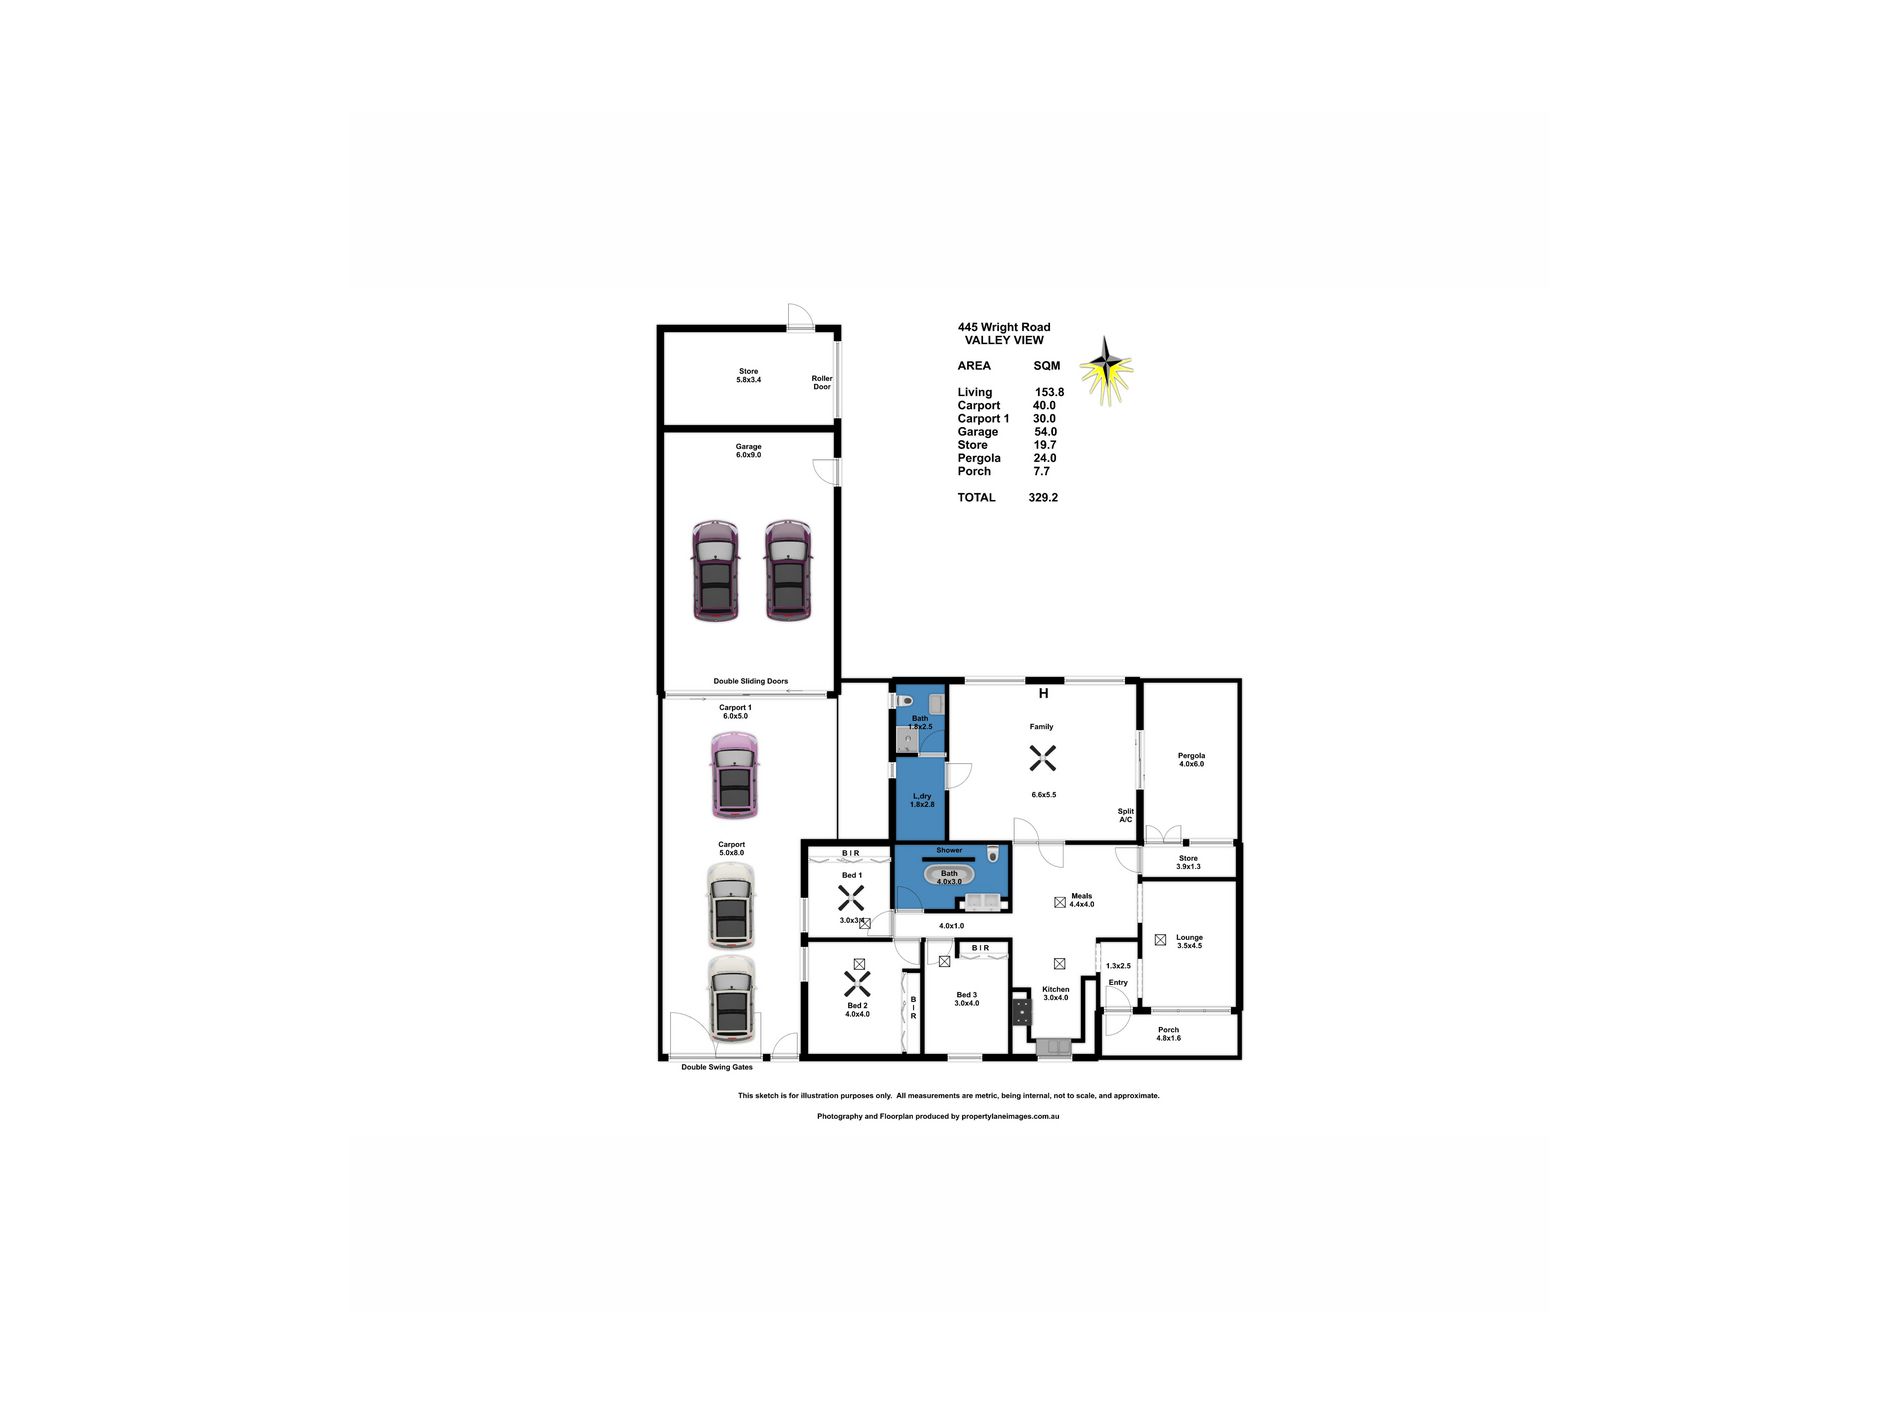 445 Wright Road, Valley View Floor Plan